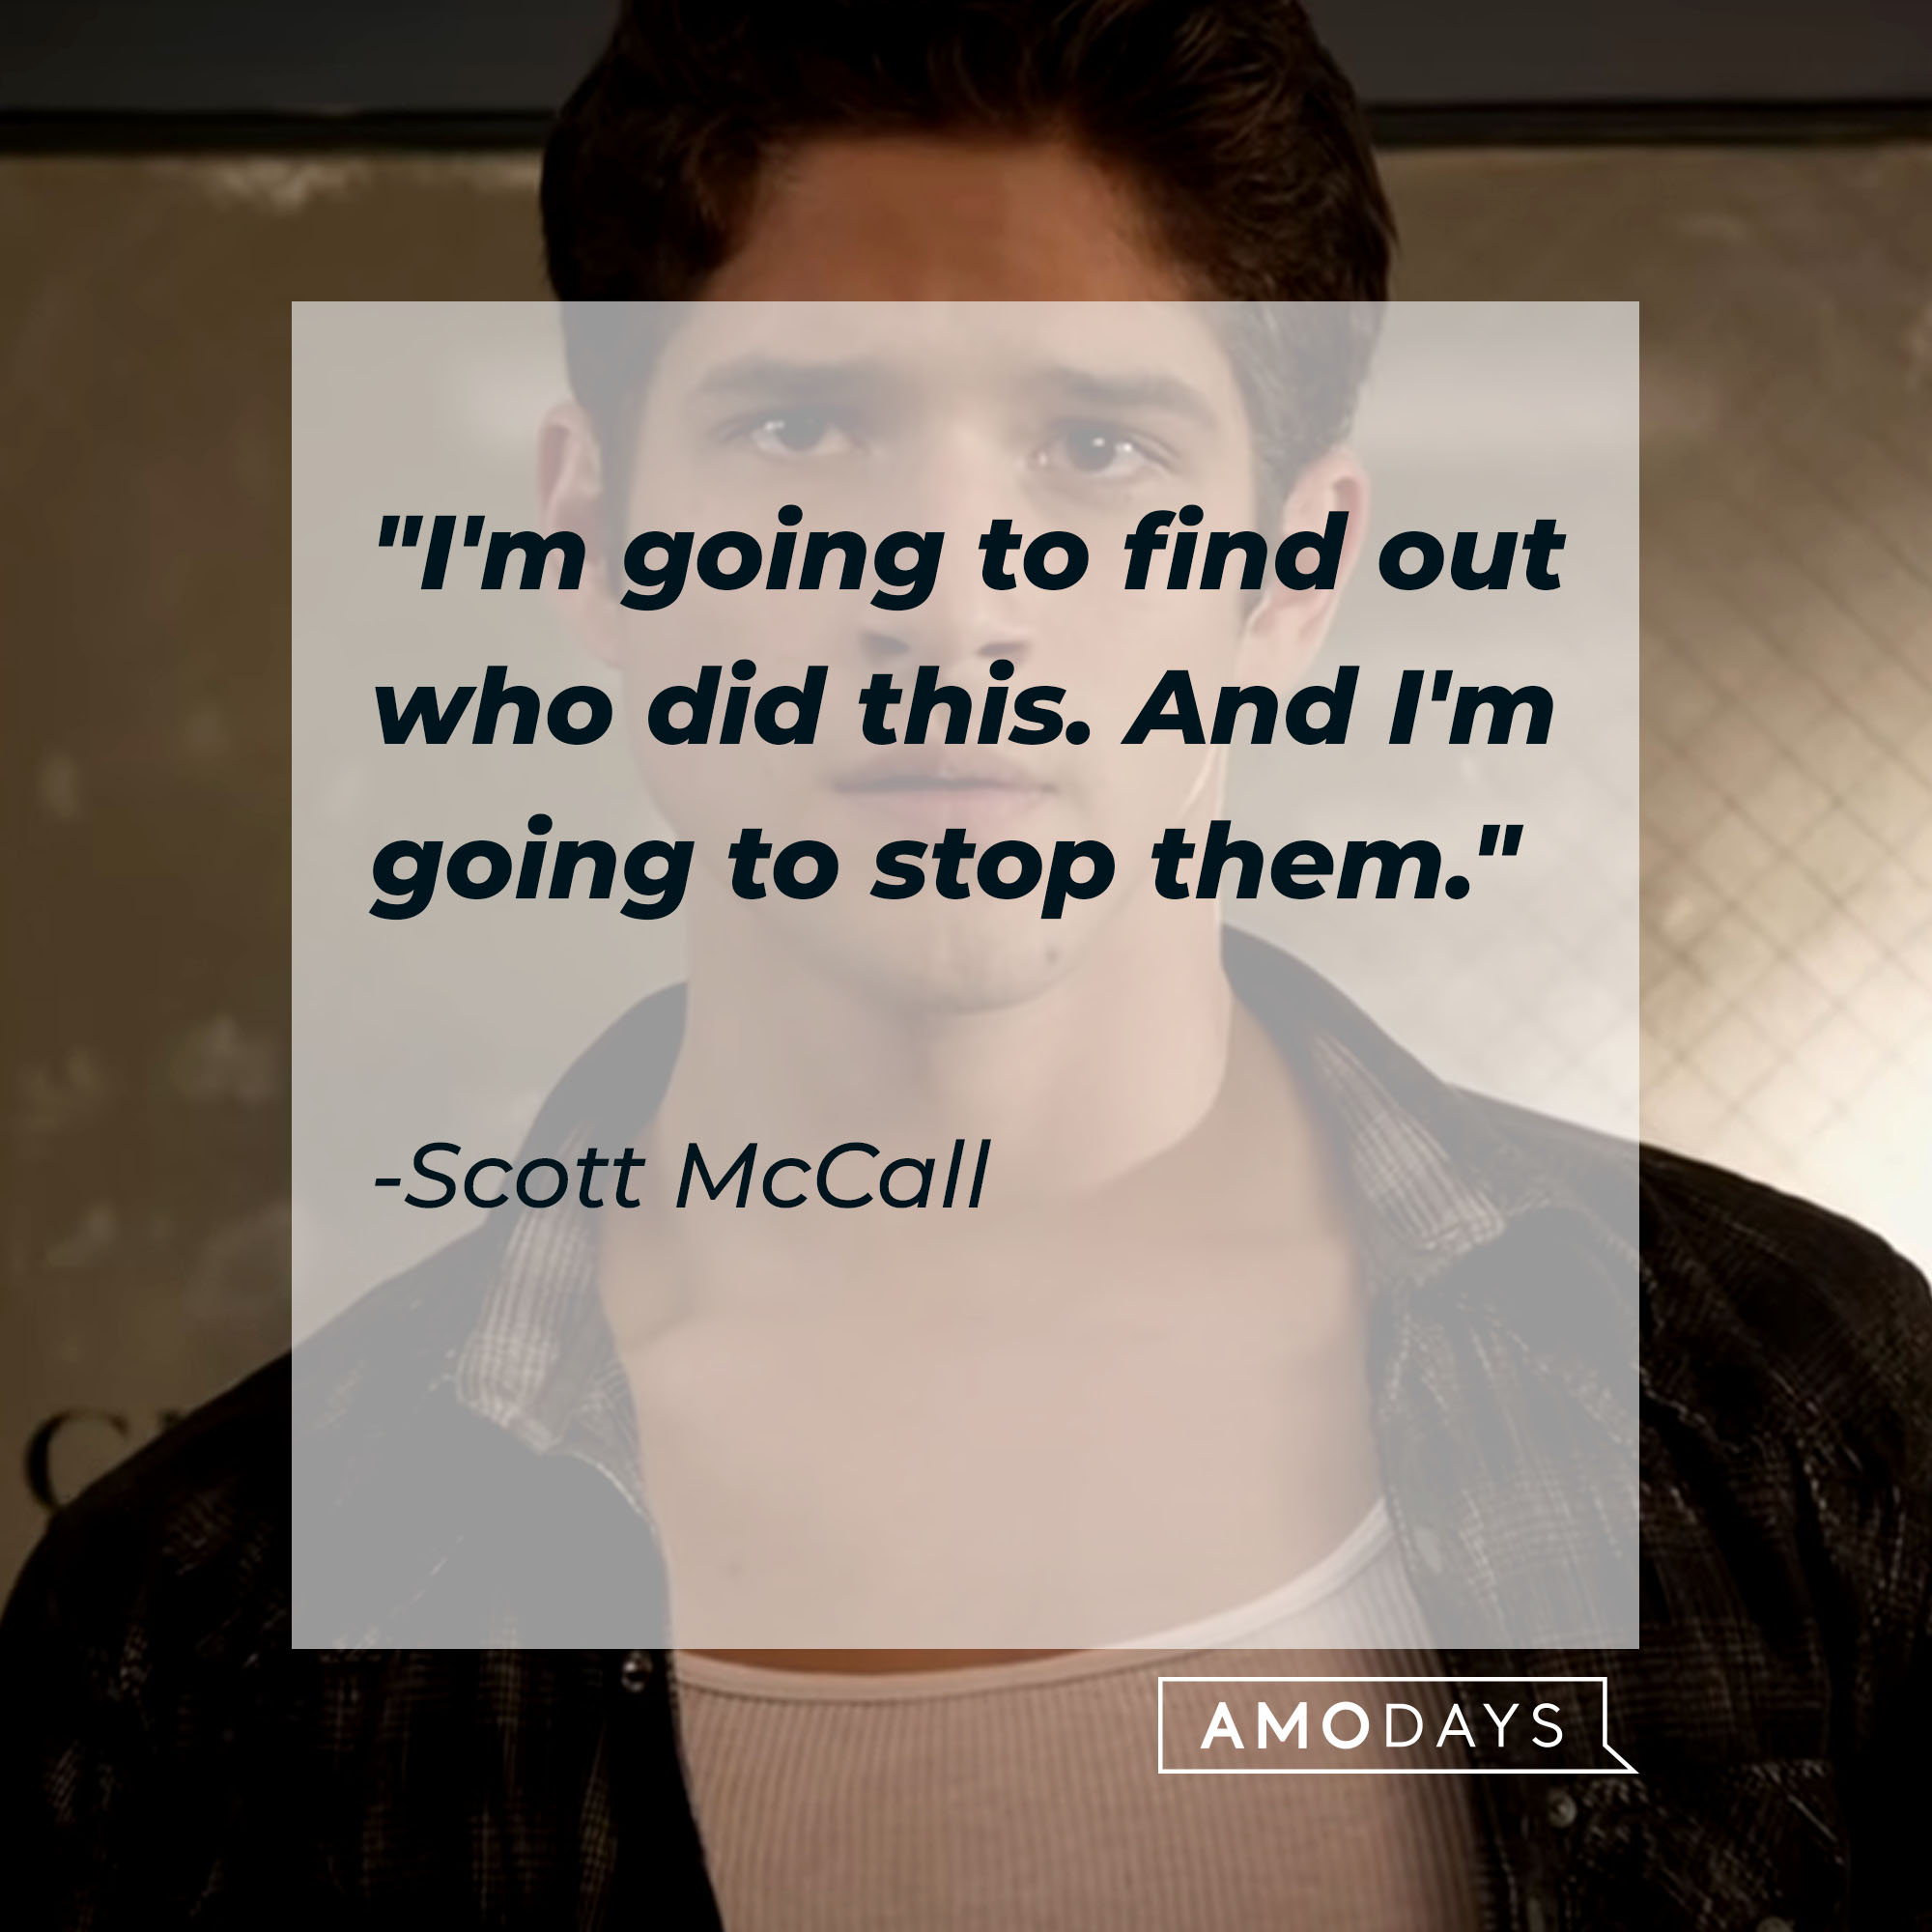 Scott McCall's quote: "I'm going to find out who did this. And I'm going to stop them" | Source: Youtube.com/WolfWatch